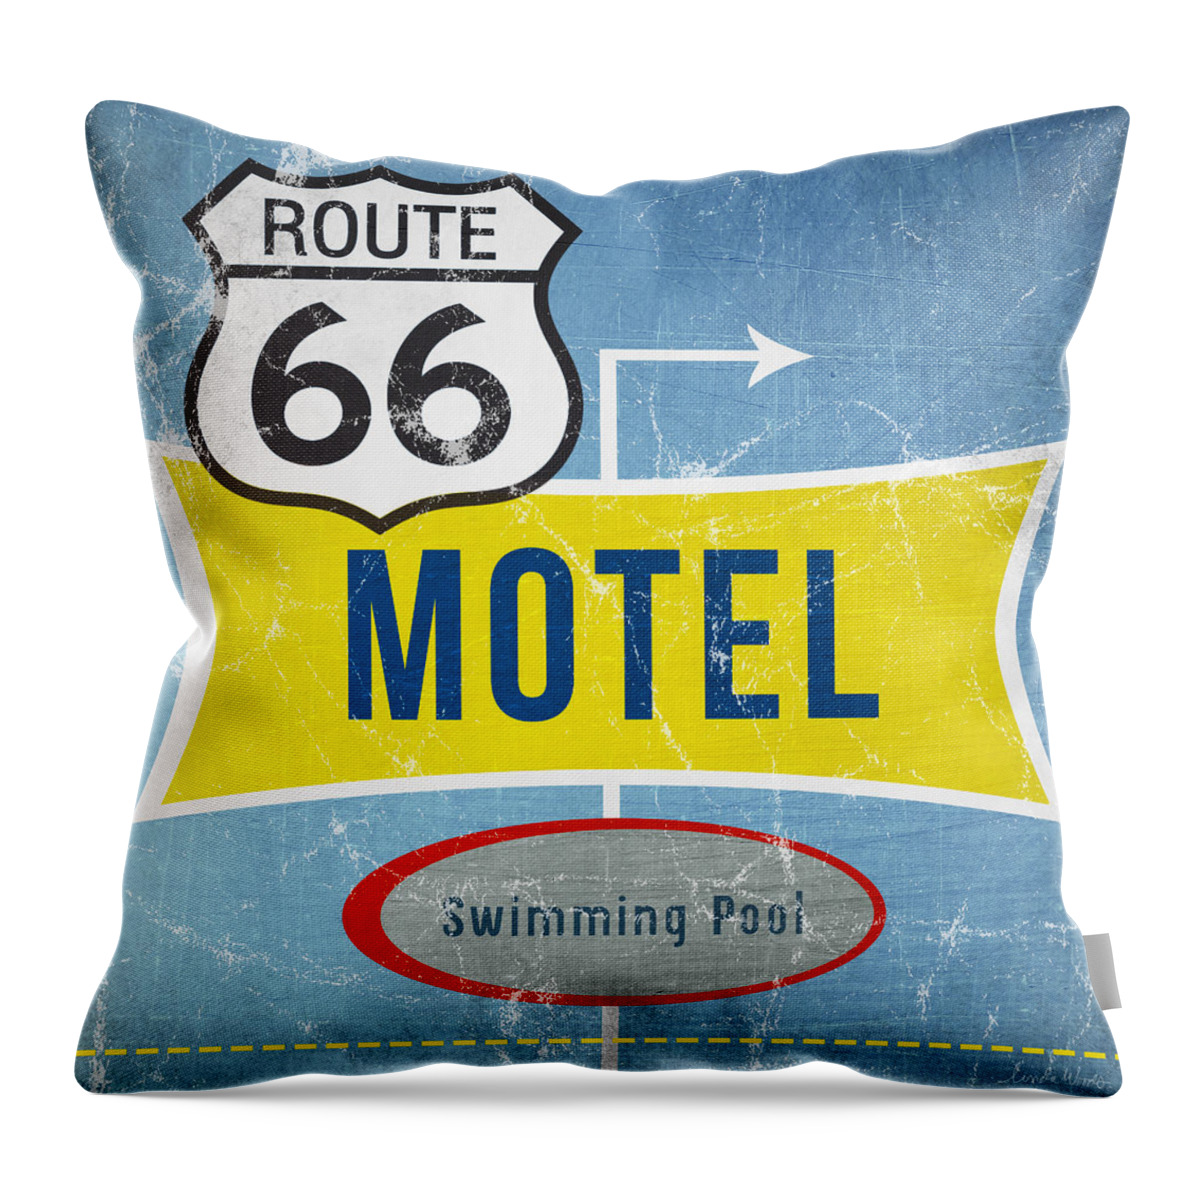 Motel Throw Pillow featuring the painting Route 66 Motel by Linda Woods